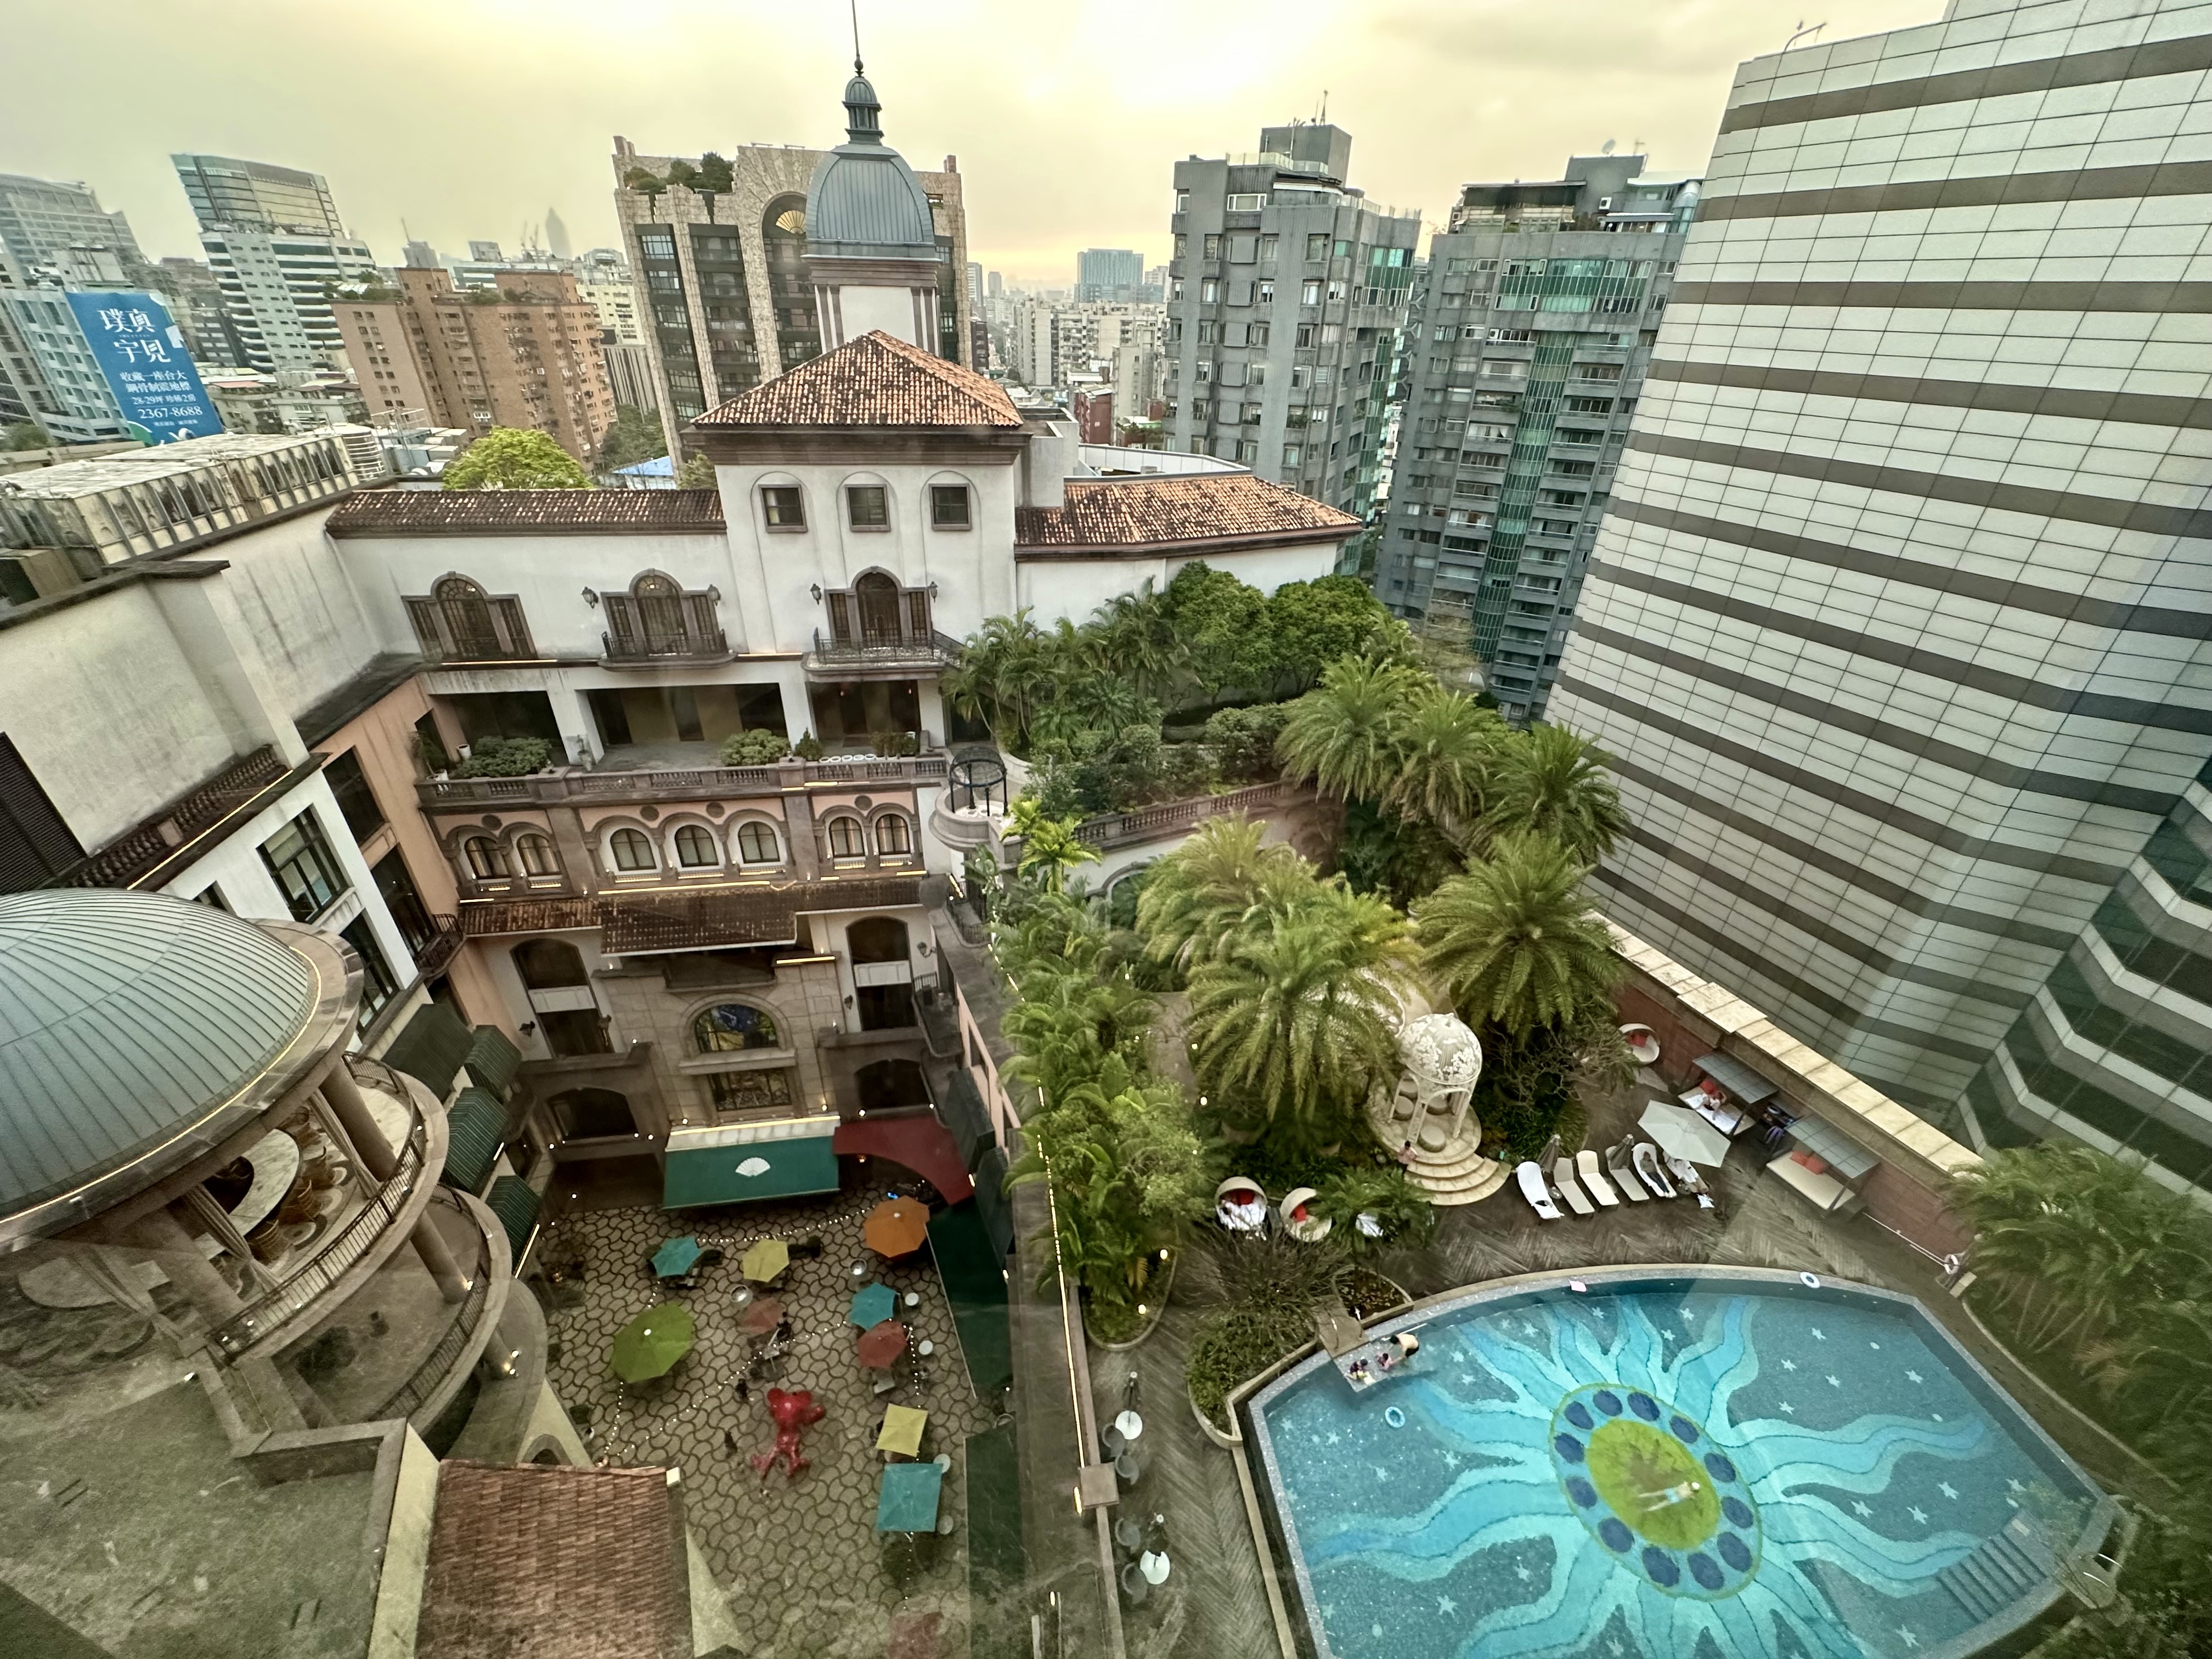 a pool in a courtyard with buildings in the background